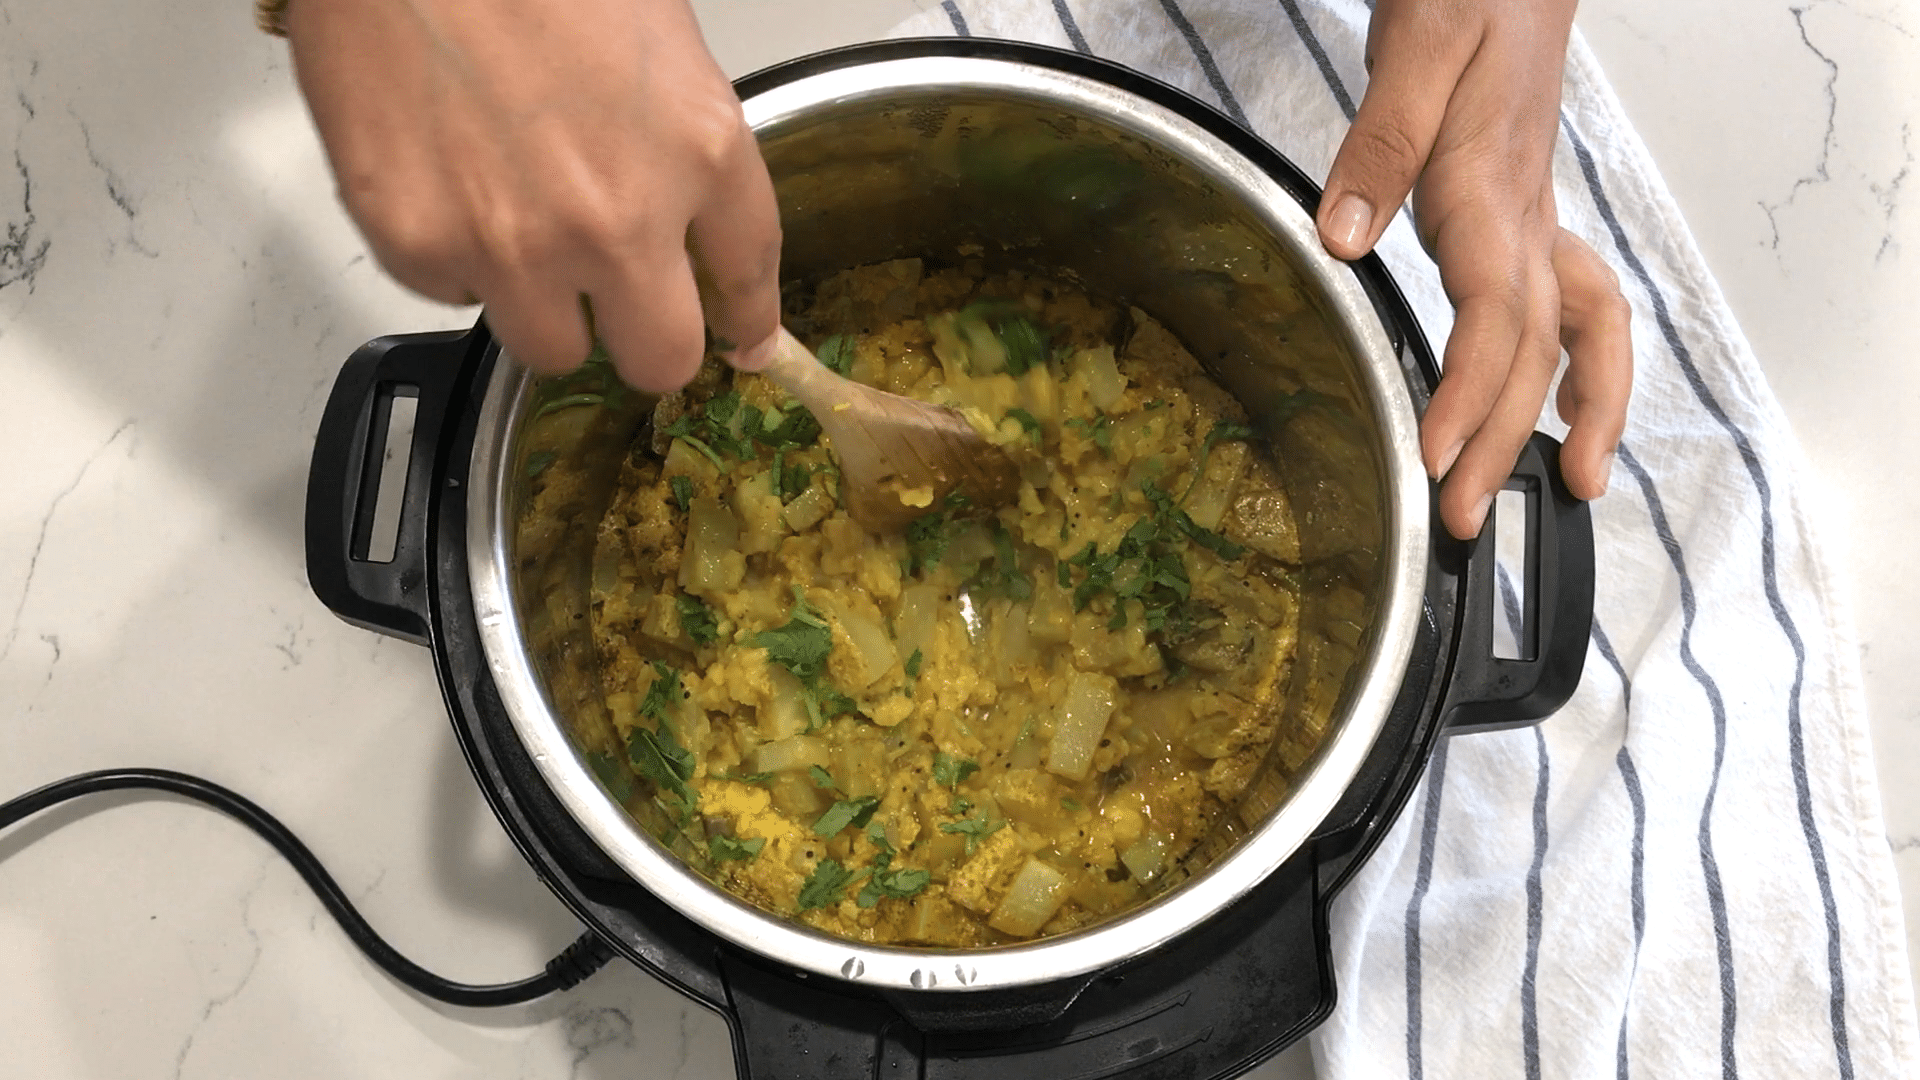 A person cooking food in a pan on a stove, with Chayote and Curry